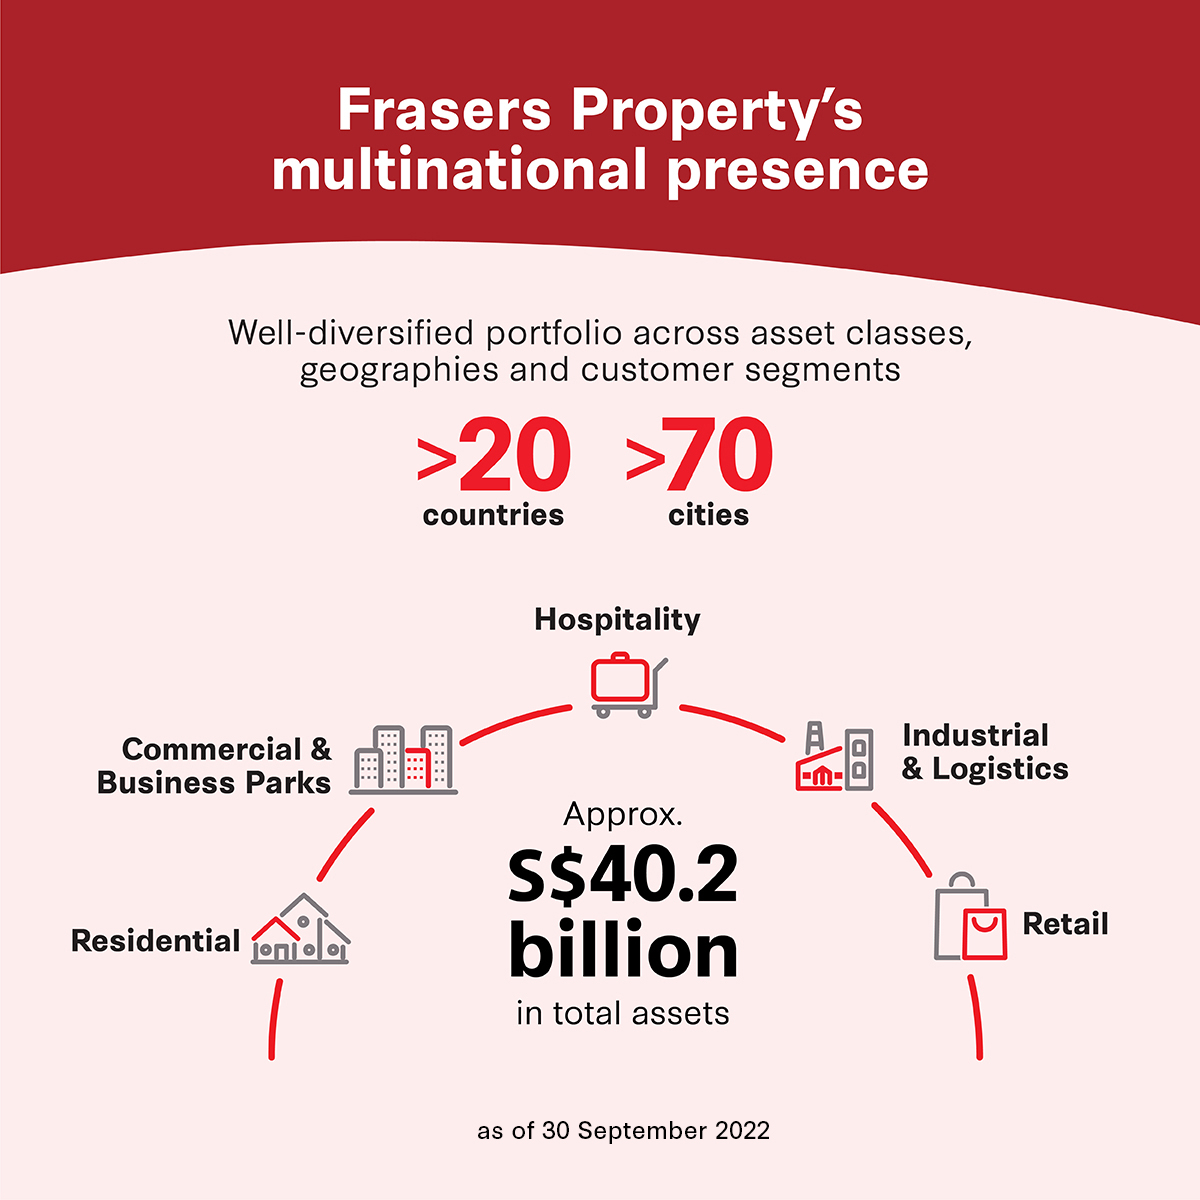 Frasers Property has a well-diversified portfolio across five asset classes in over 20 countries and more than 70 cities across Asia, Australia, Europe, the Middle East and Africa, with total assets of approximately S$40.2 billion as of 30 September 2022.